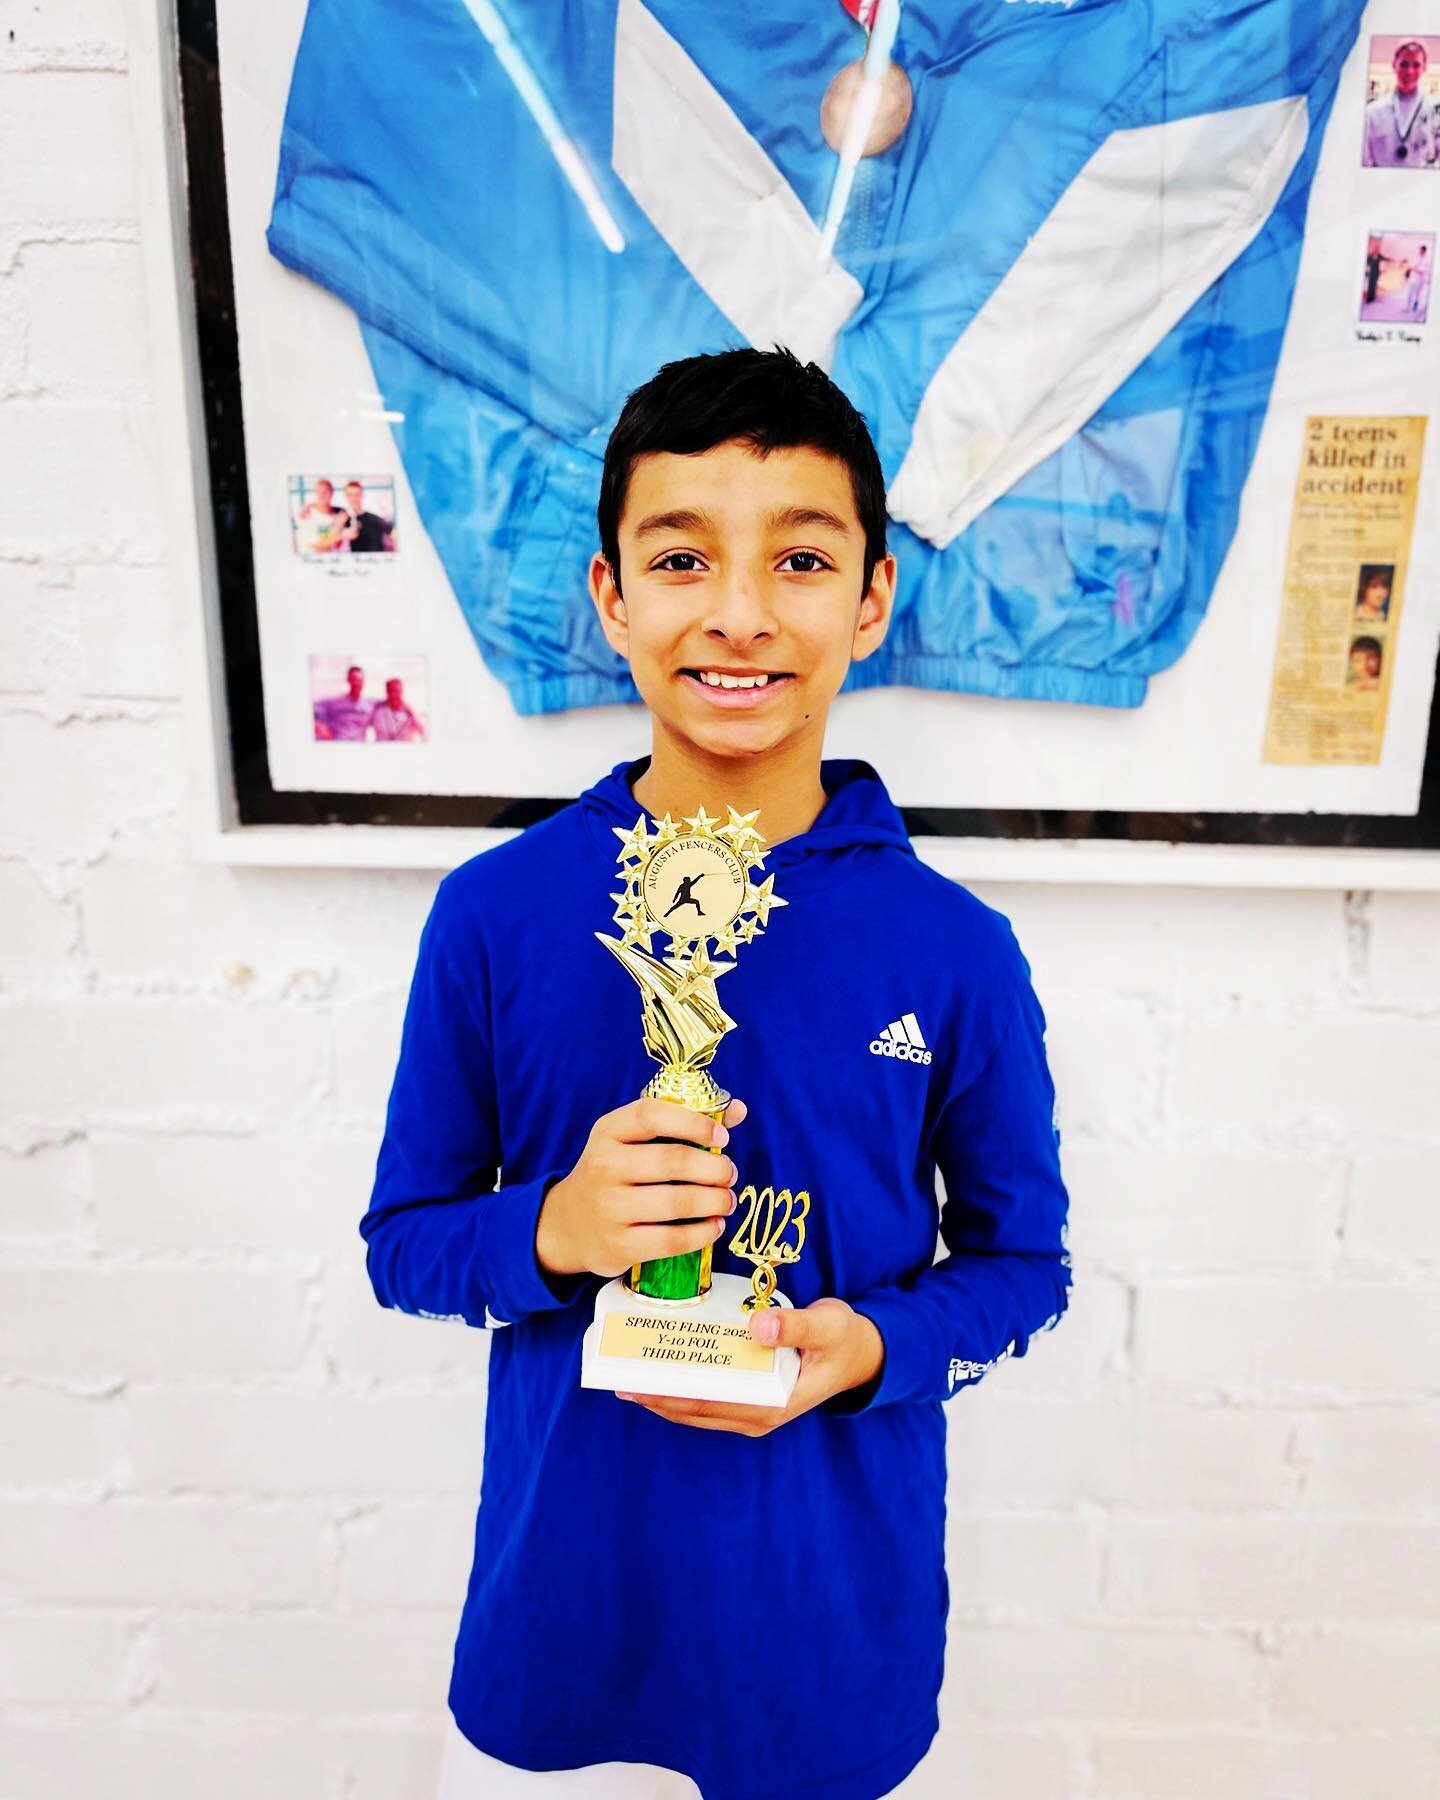 Congratulations to Vin for his Bronze medal 🥉 in the Y10 event at the Augusta Spring Fling Tournament this weekend!!